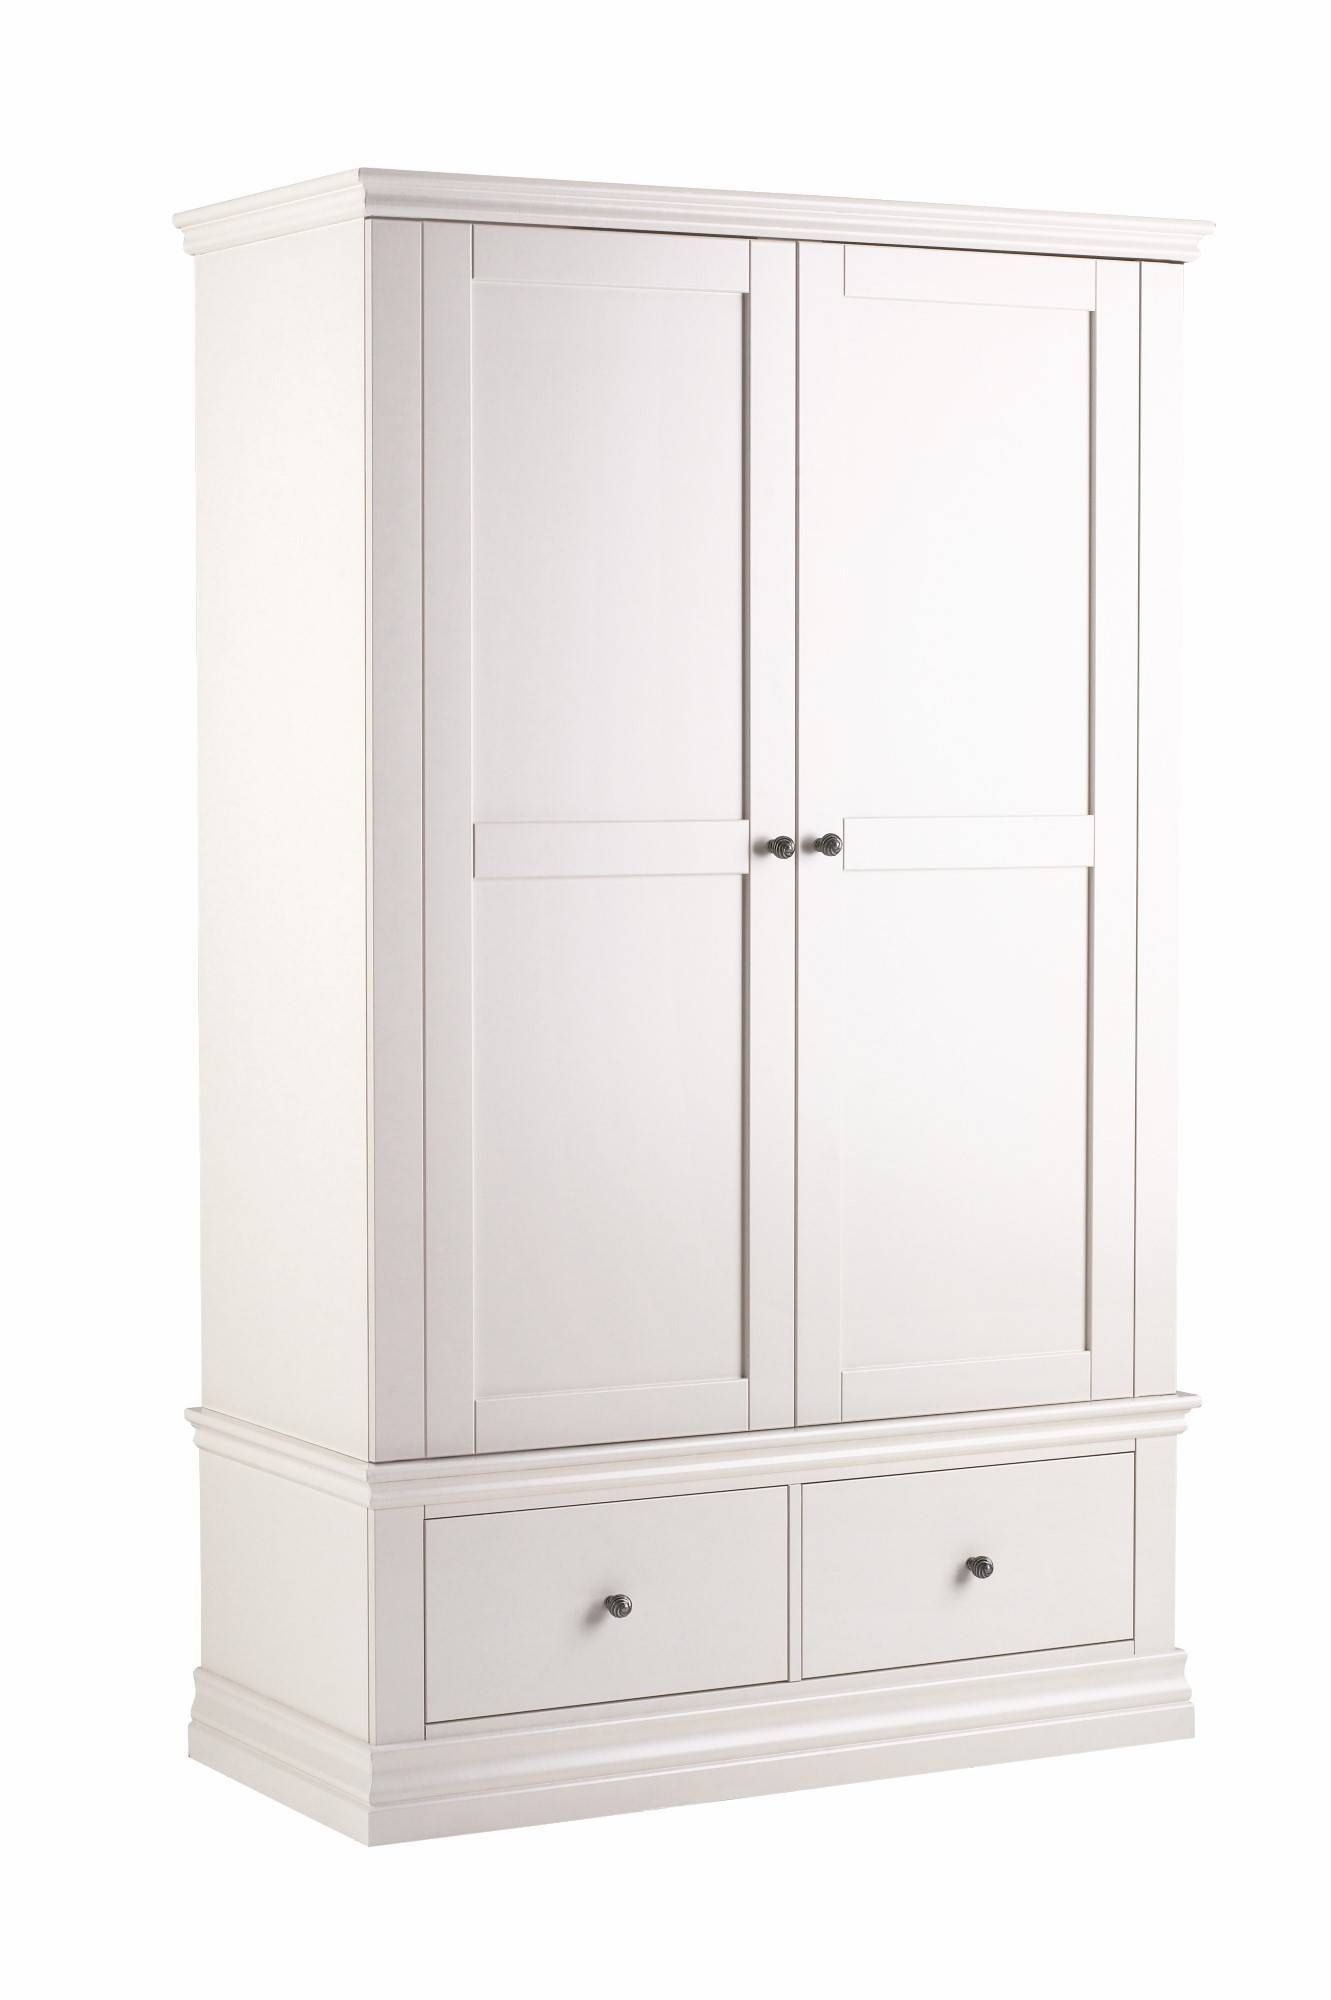 Wardrobes, Bedroom Furniture In Kent From Lukehurst Inside Large White Wardrobes With Drawers (View 5 of 15)